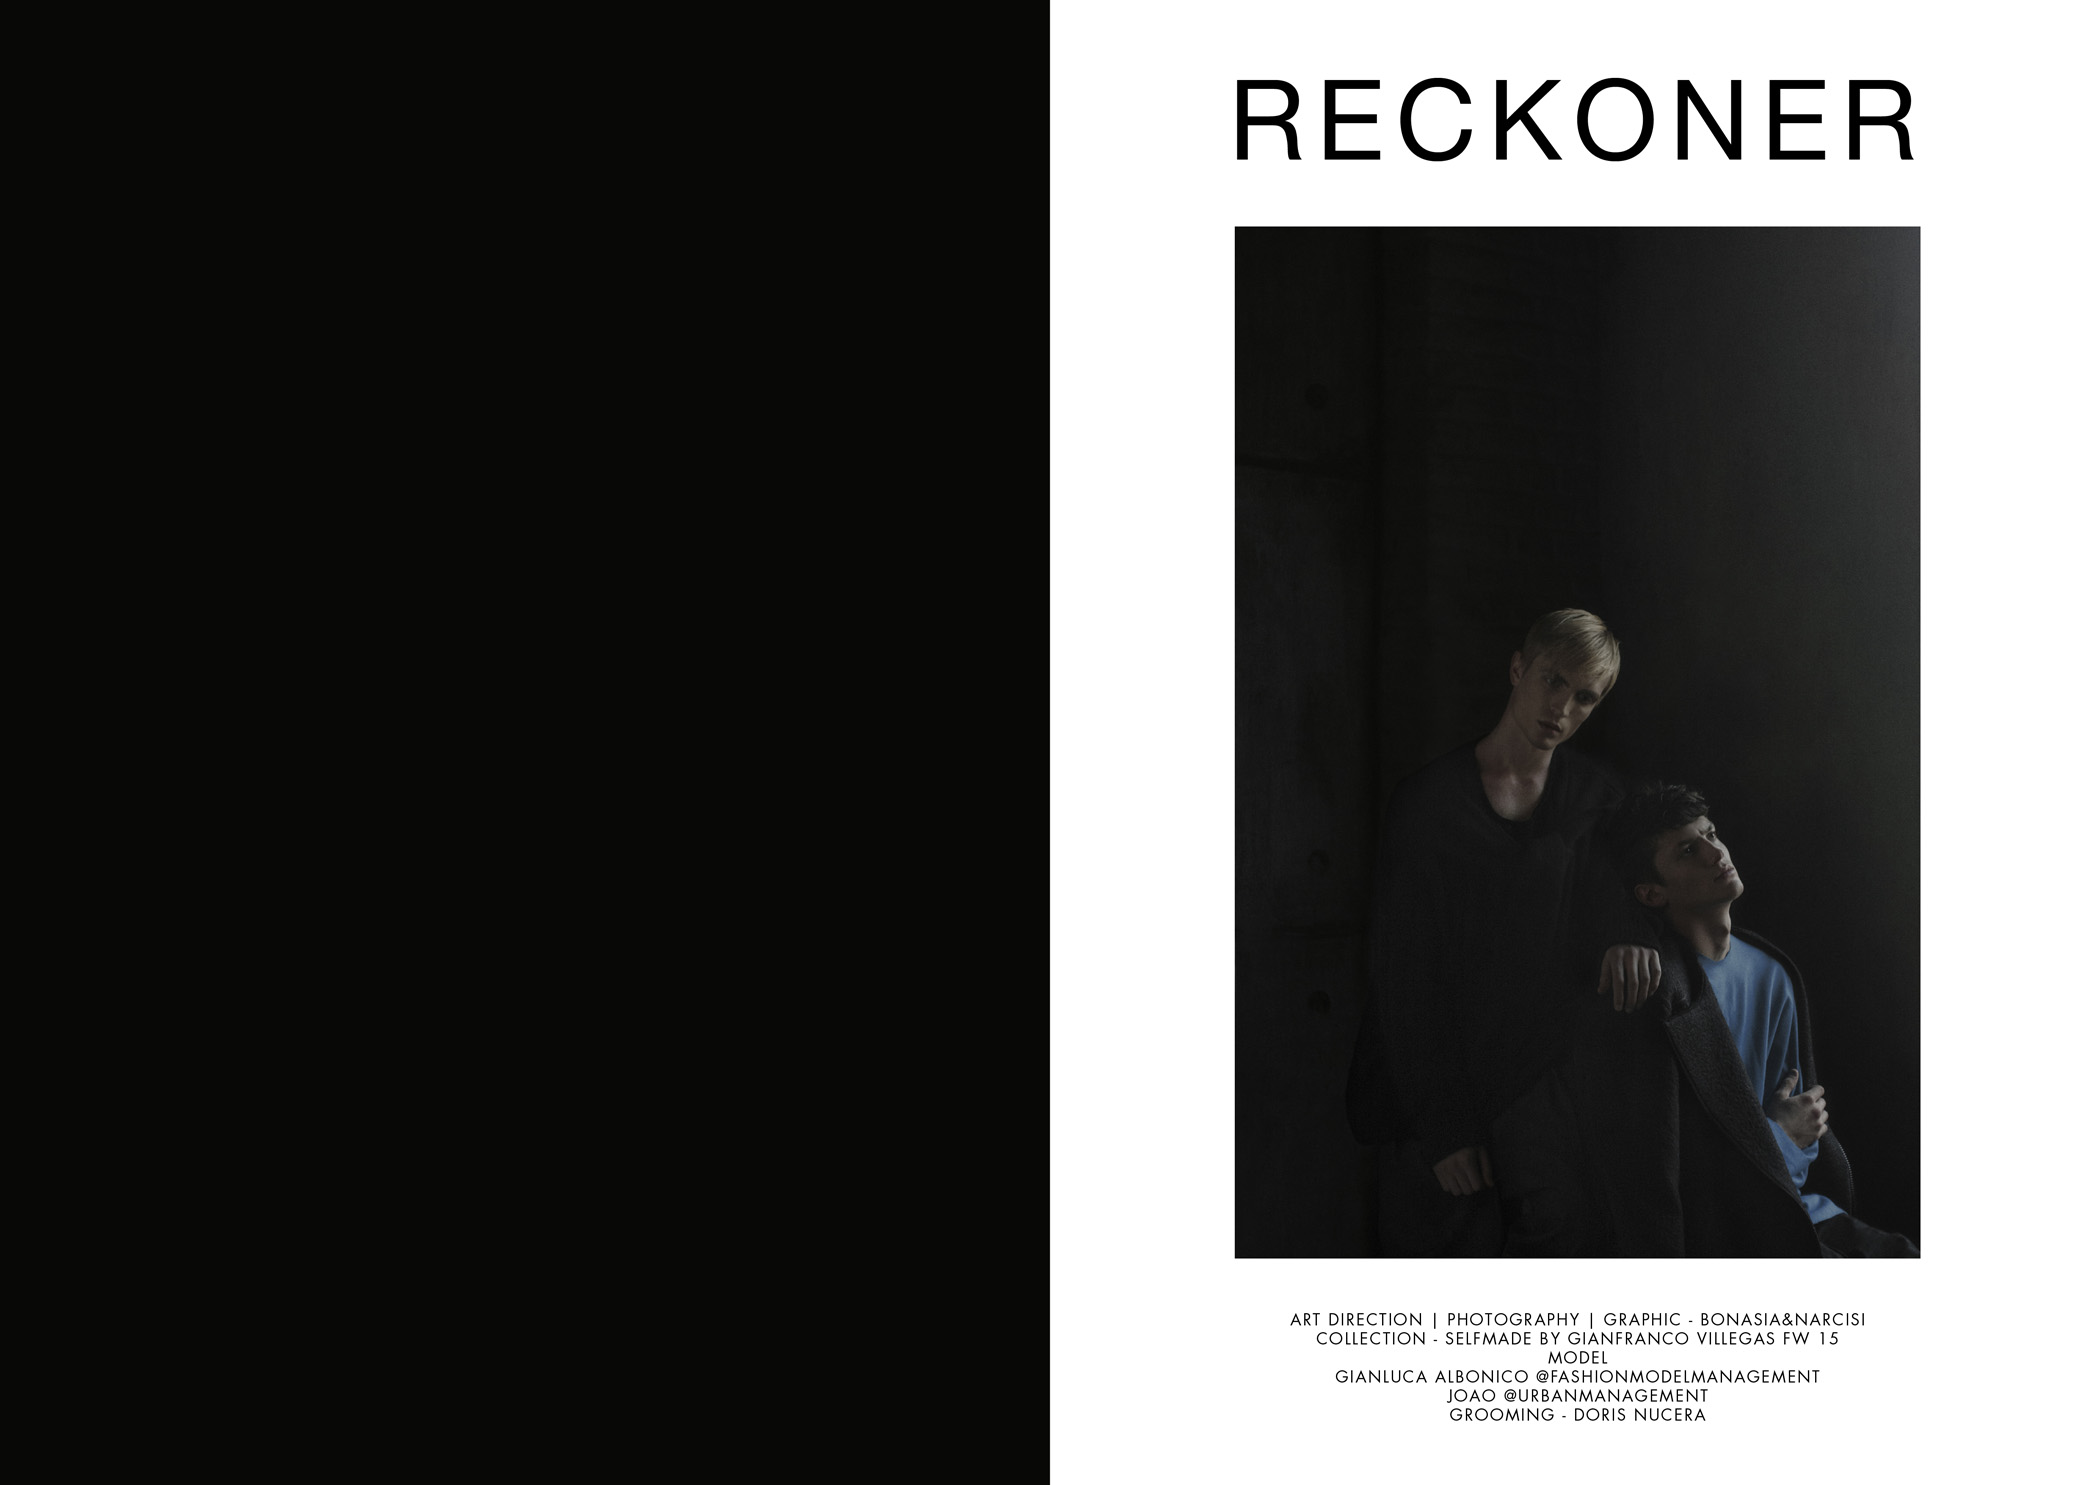 Reckoner by Bonasia and Narcisi for CHASSEUR MAGAZINE